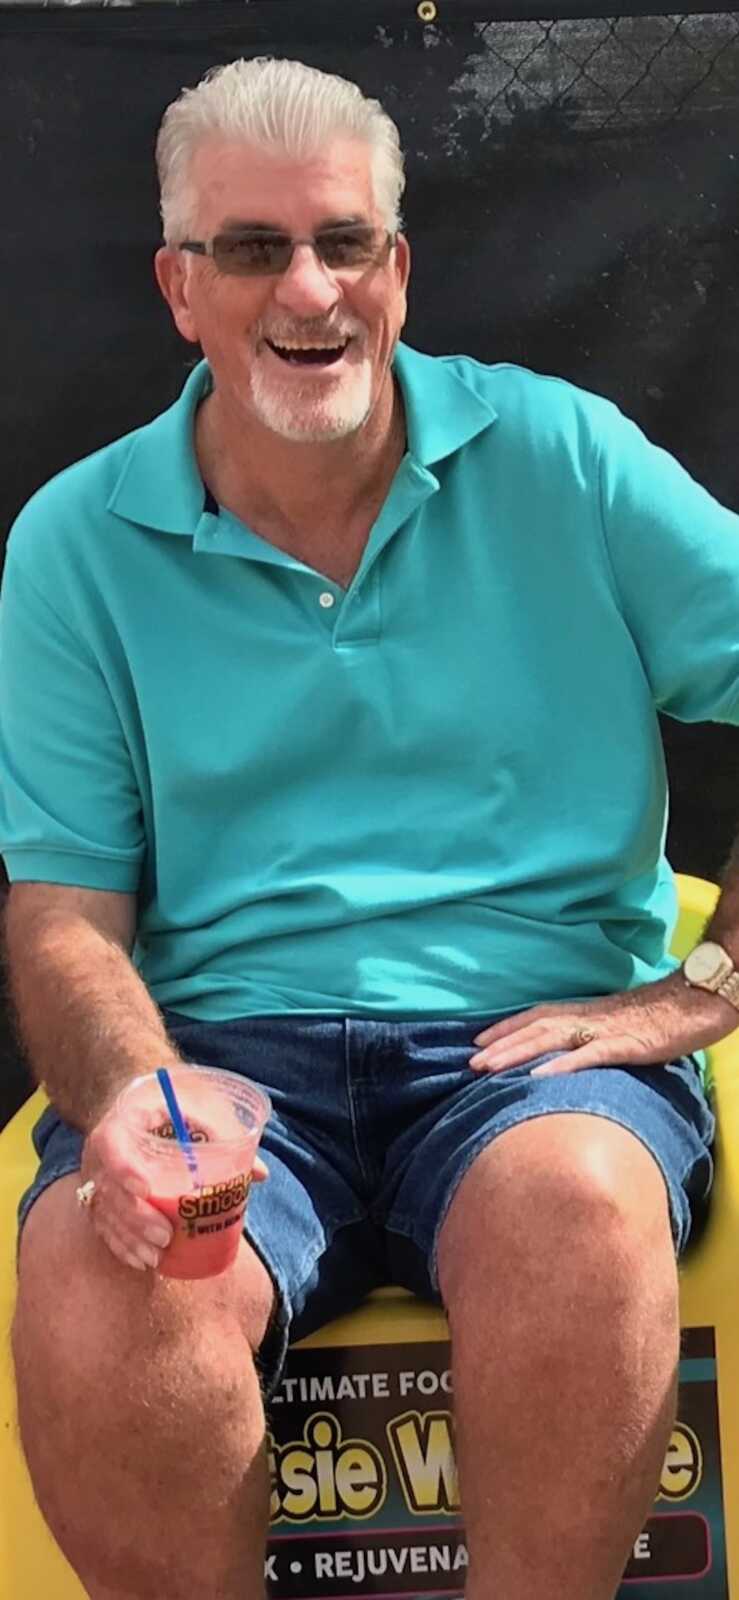 Dad in blue shirt smiling